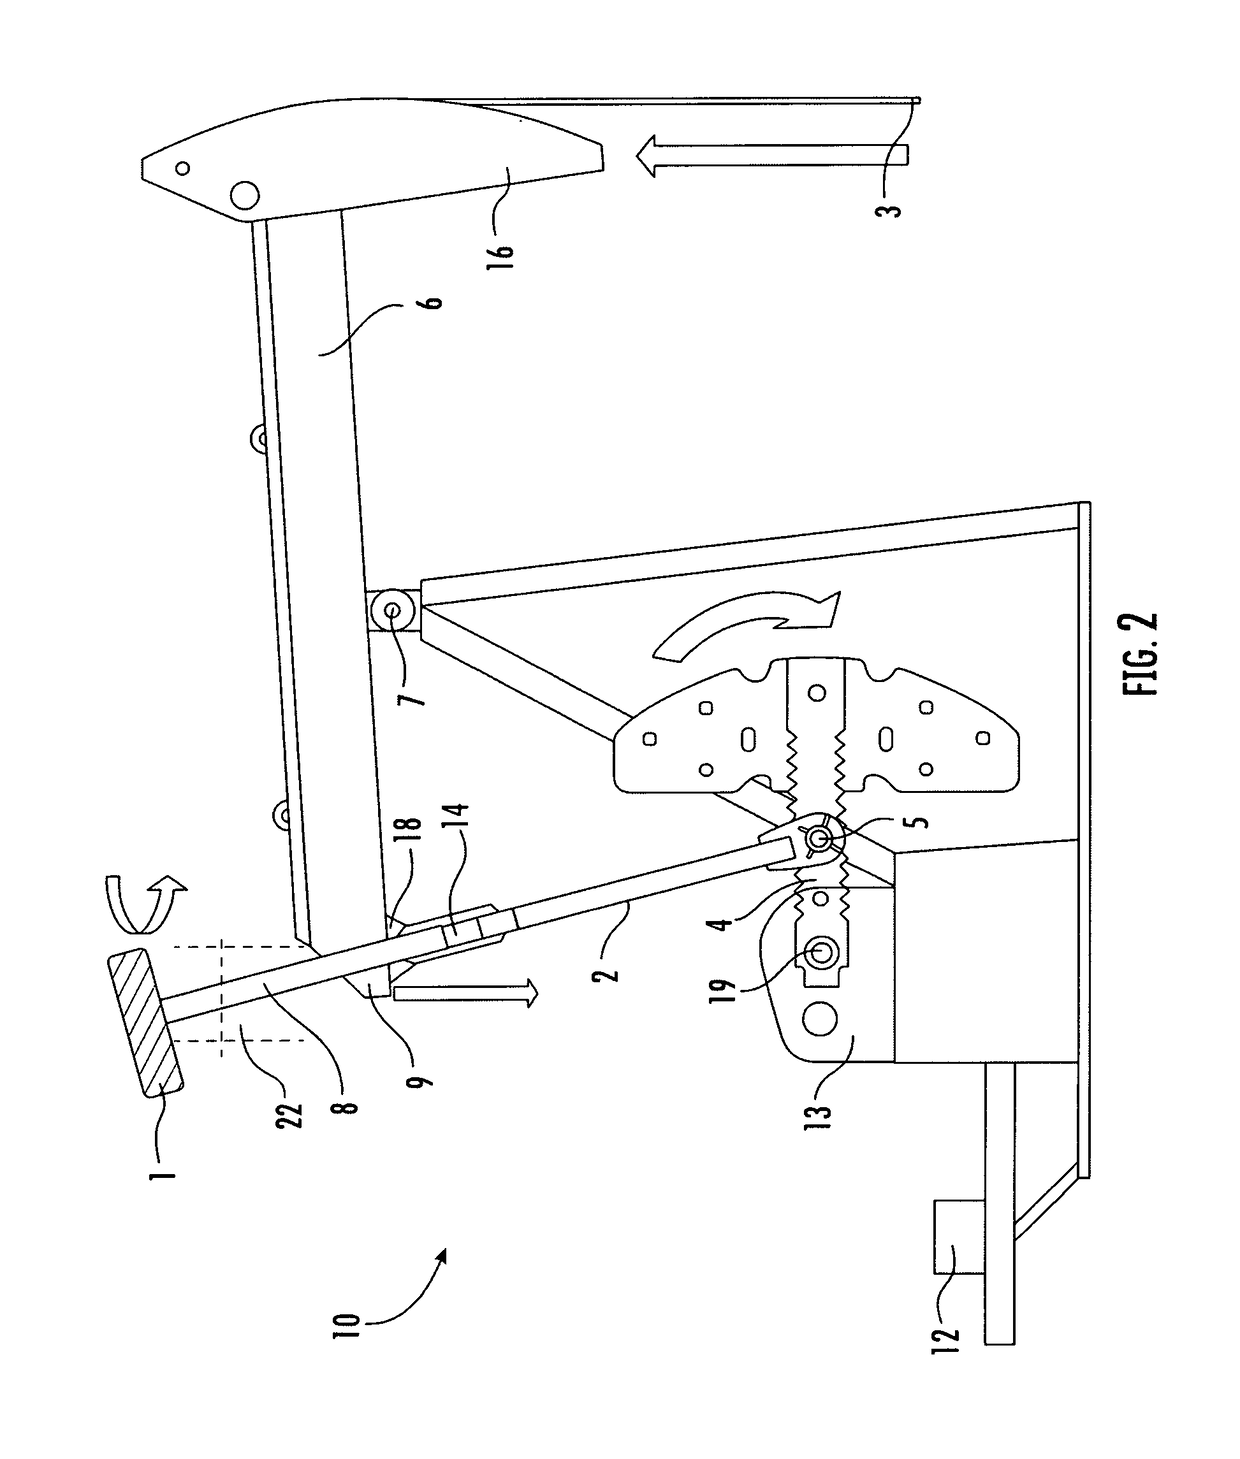 Articulated reciprocating counterweight